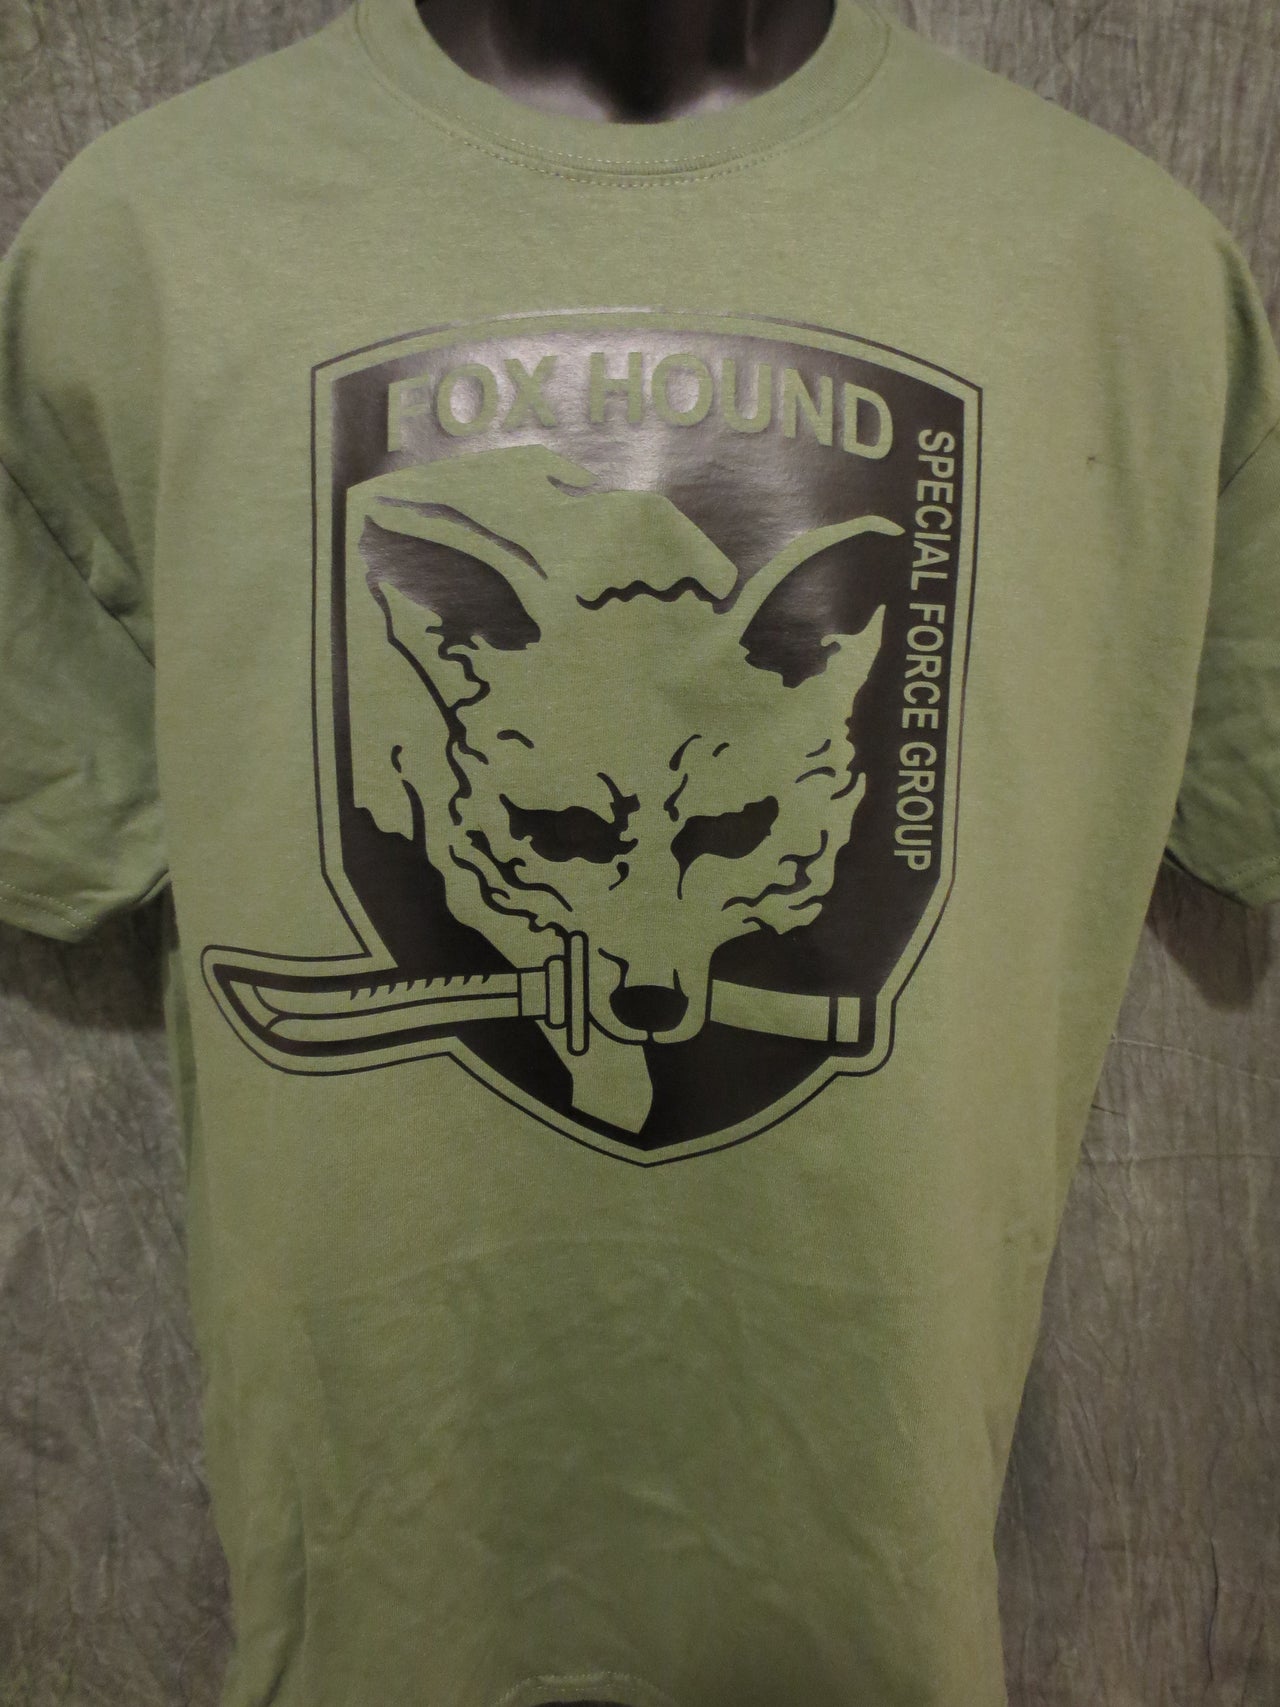 Metal Gear Solid Fox Hound Special Force Group Tshirt: Military Army O.D. Green With Black  Print - TshirtNow.net - 3